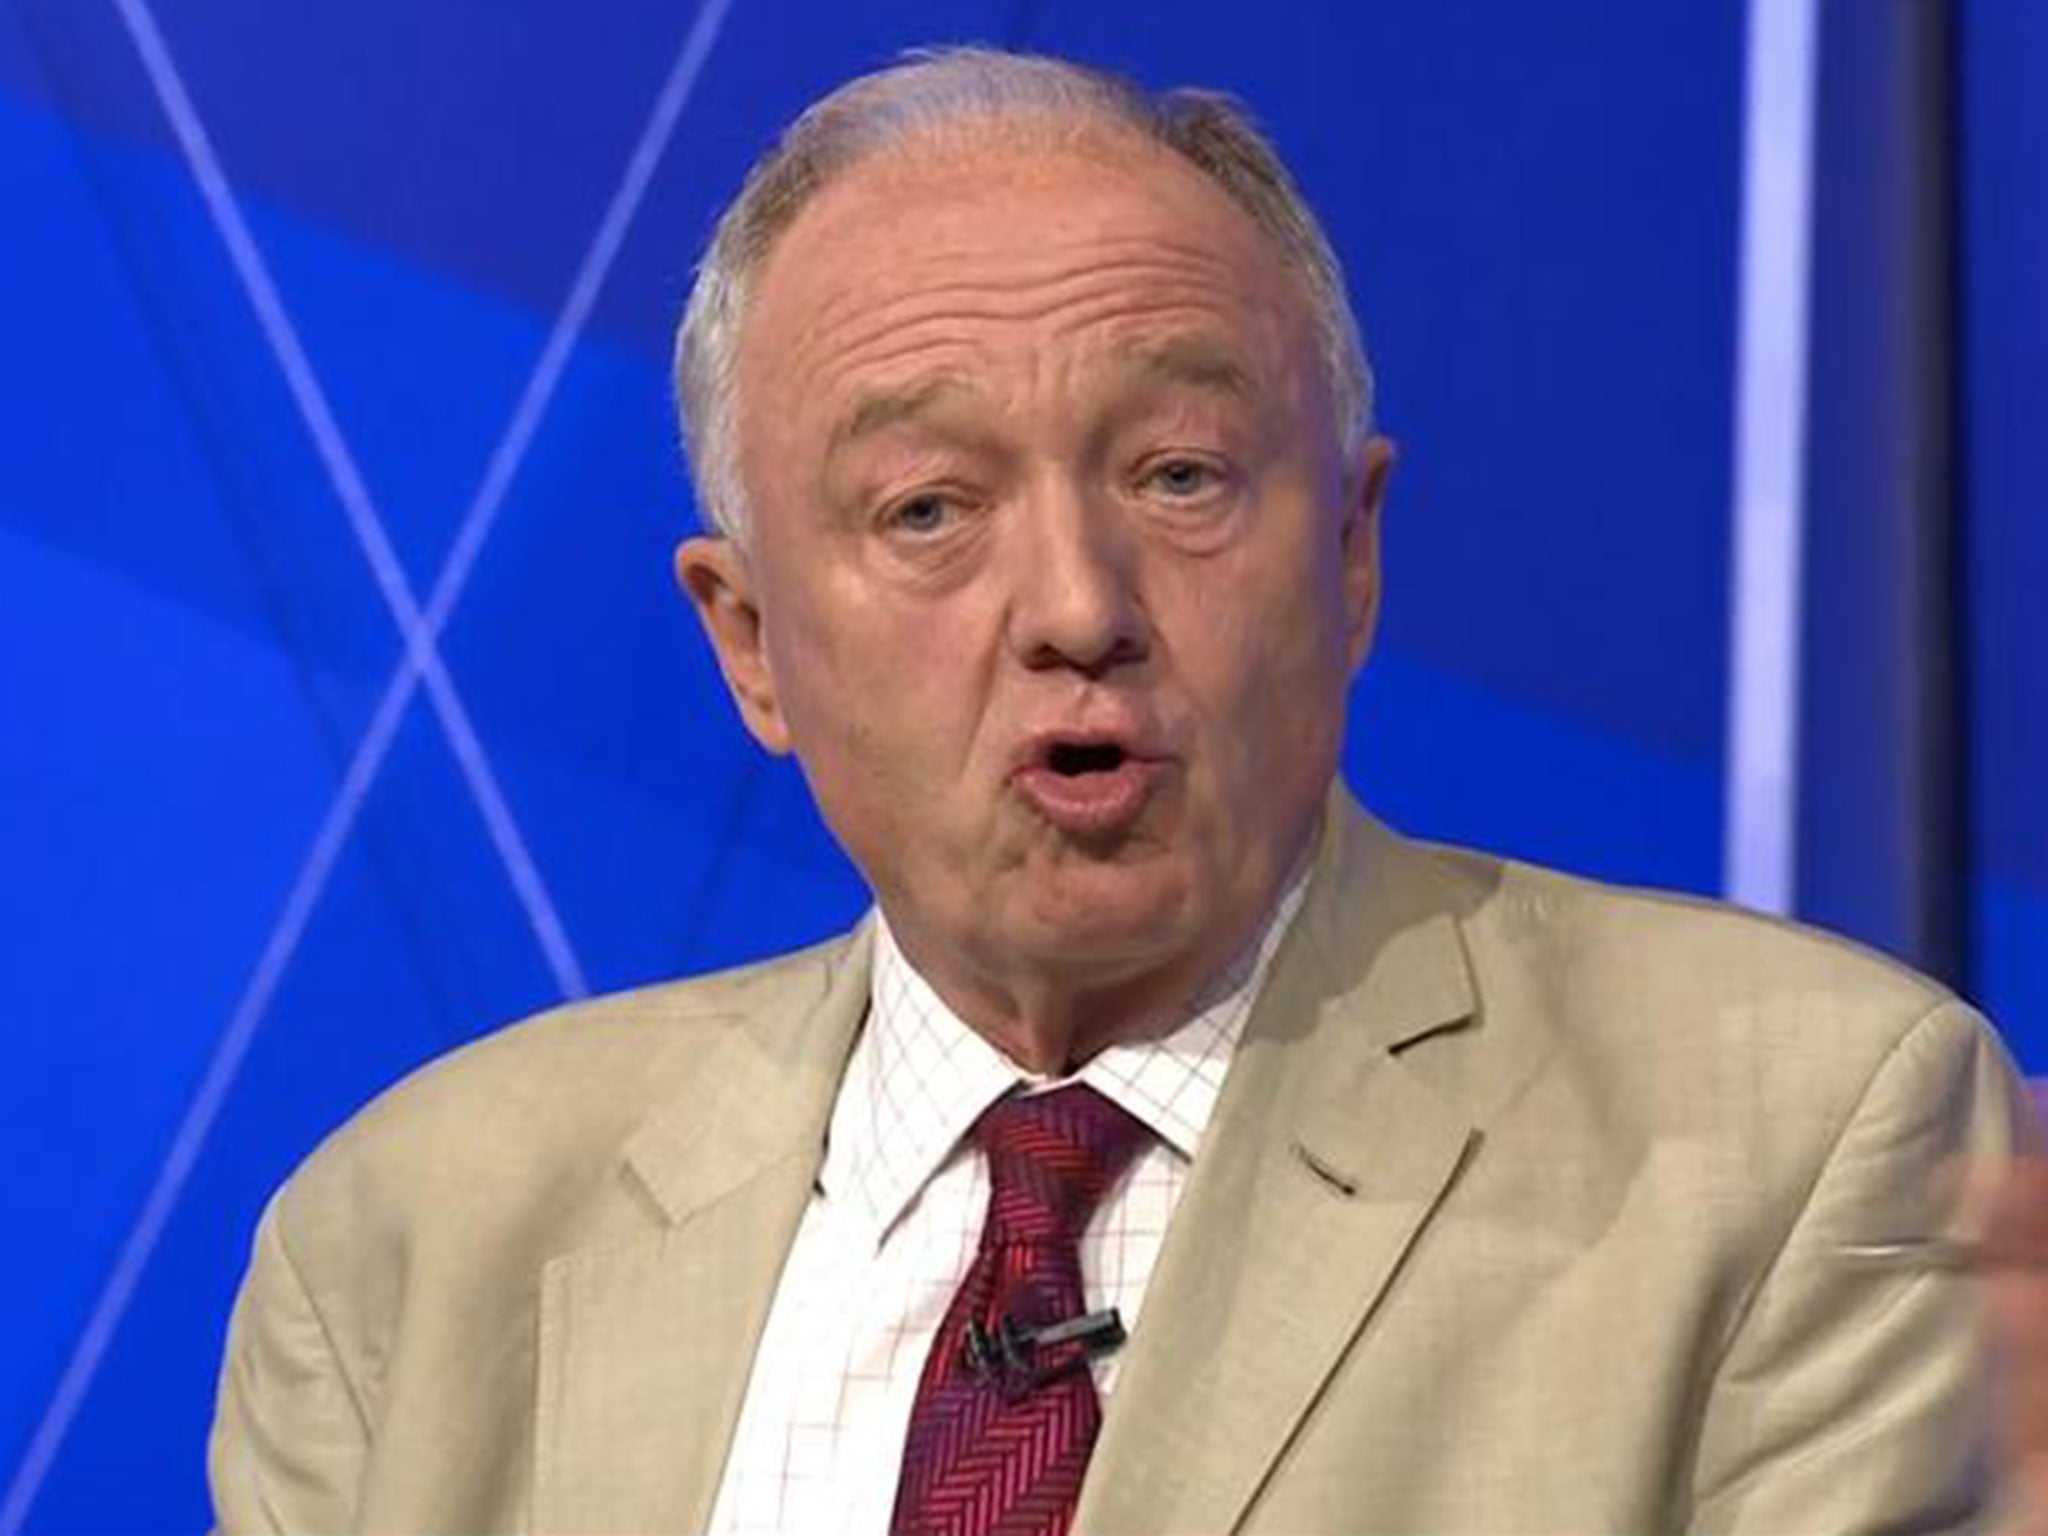 Ken Livingstone sparked a heated debate on Question Time